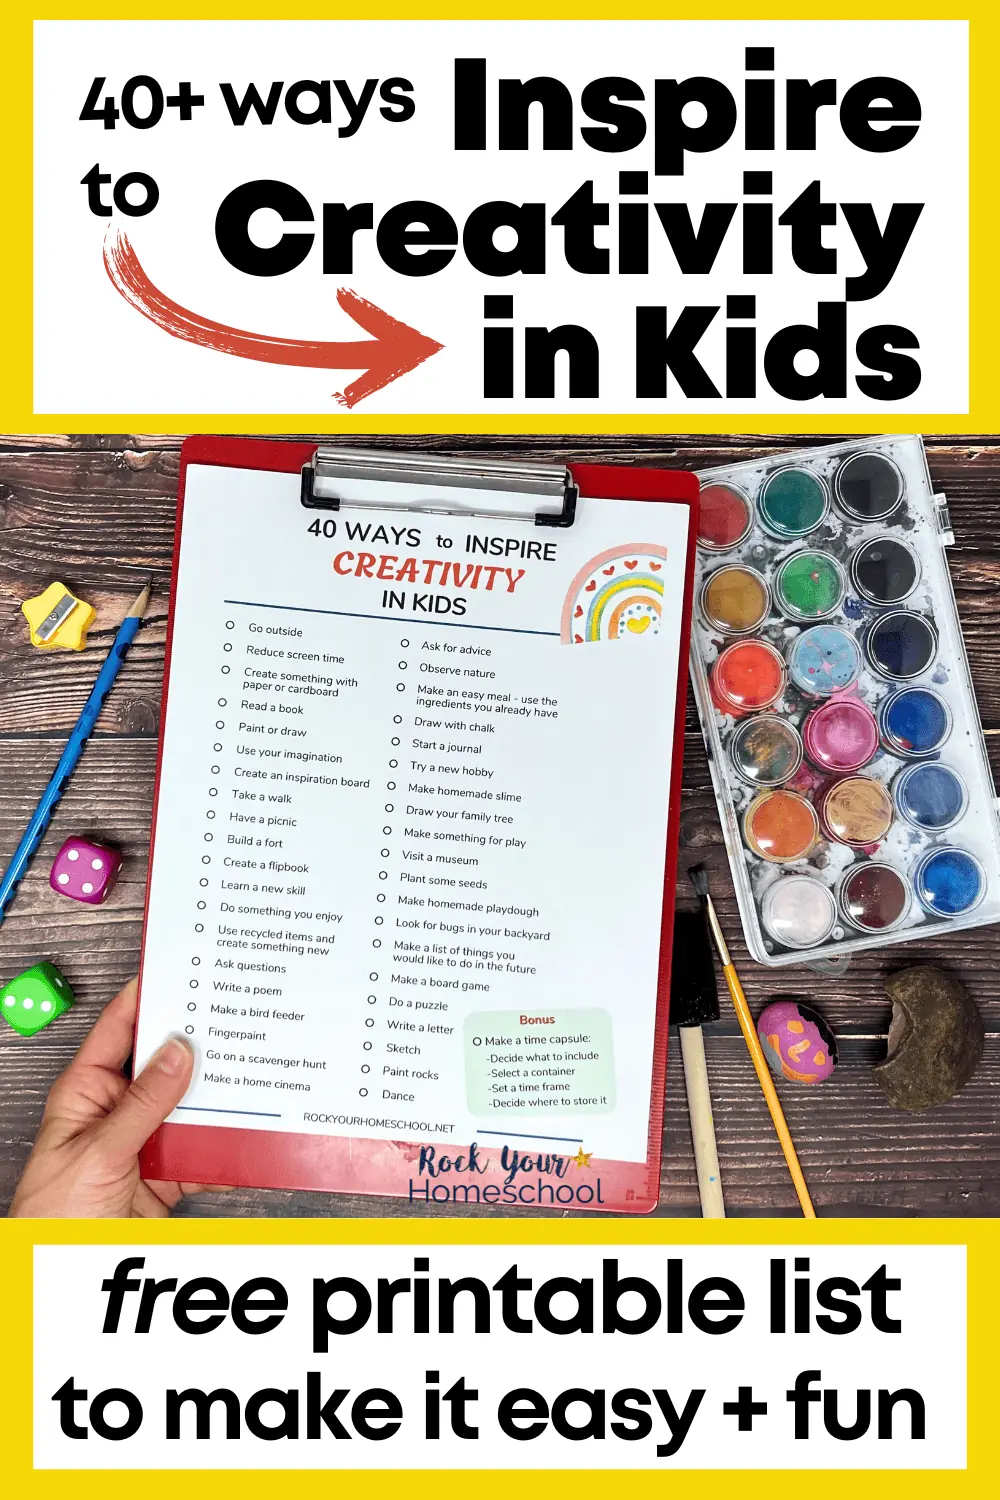 Inspire Creativity in Kids: 40+ Simple and Fun Ways (Free)